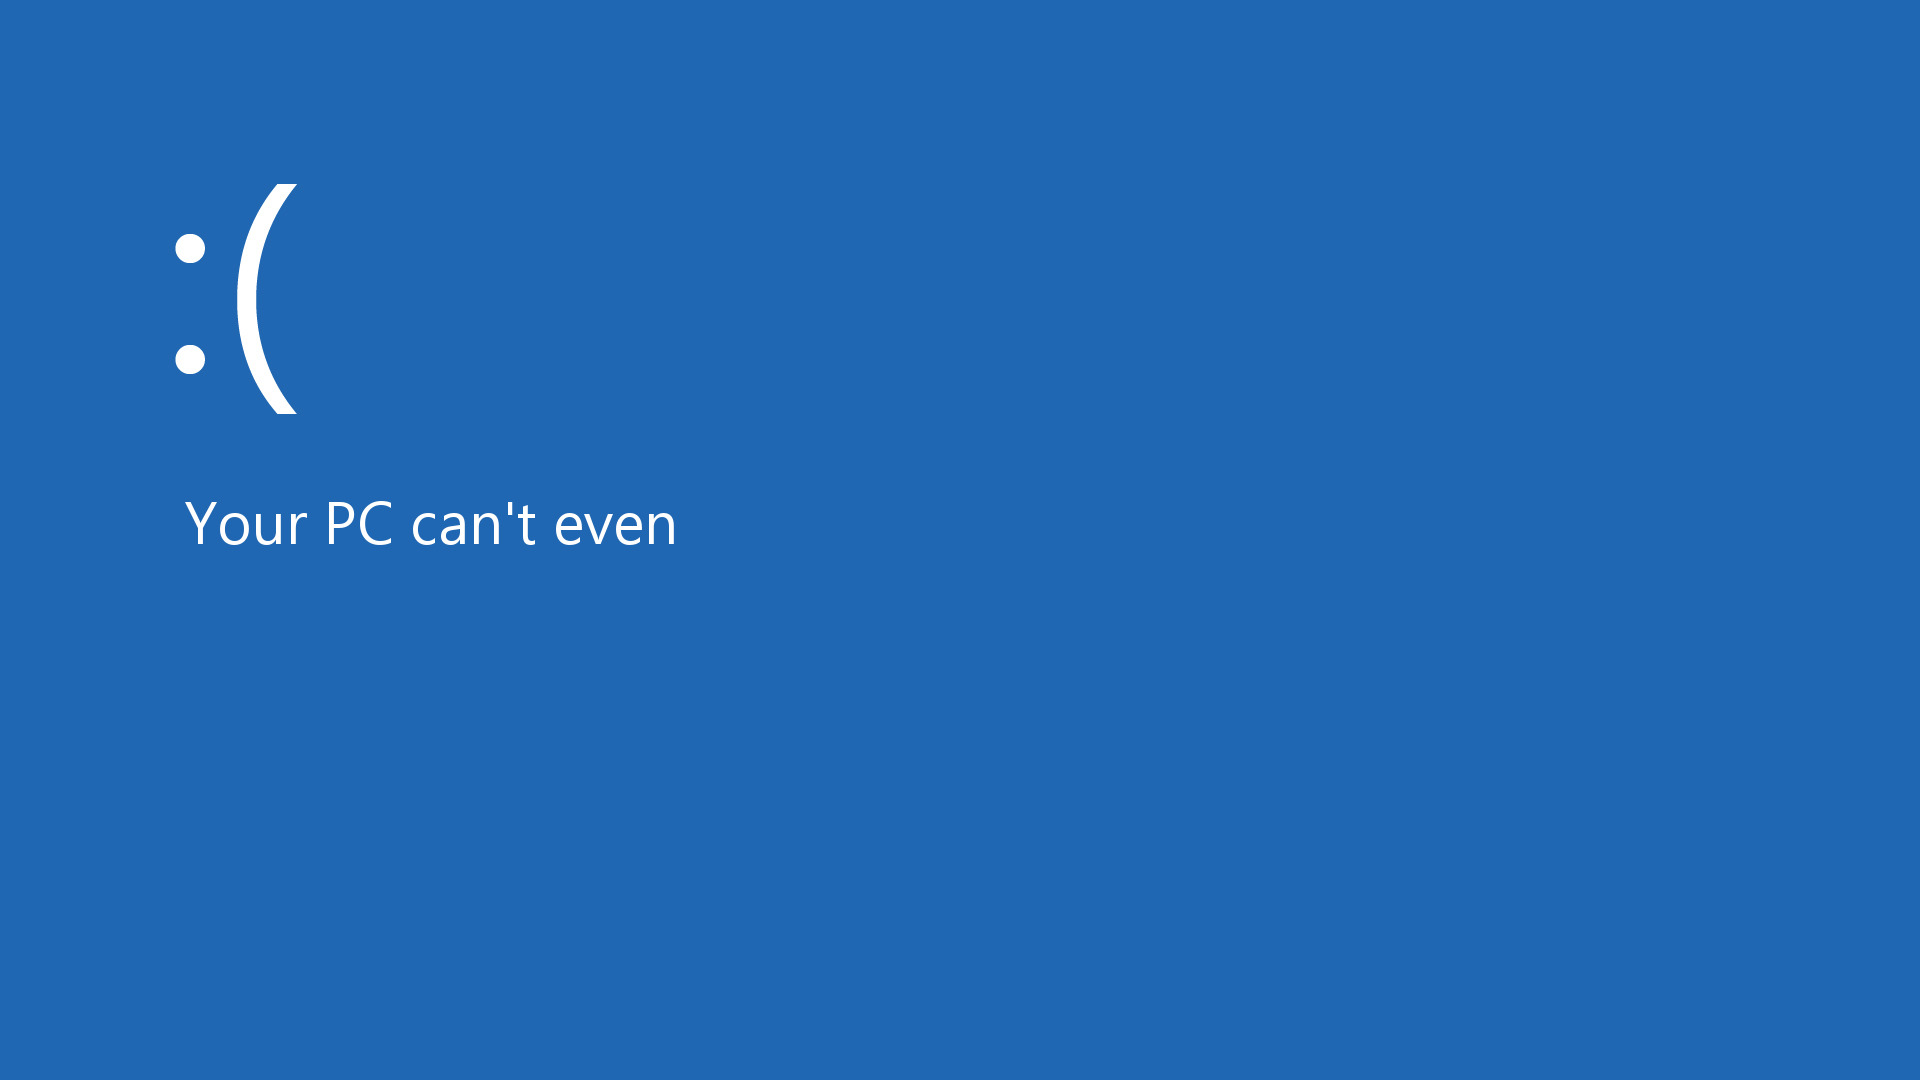 BSOD, Windows 8, Operating Systems, Frown, Humor, Emoticons Wallpaper